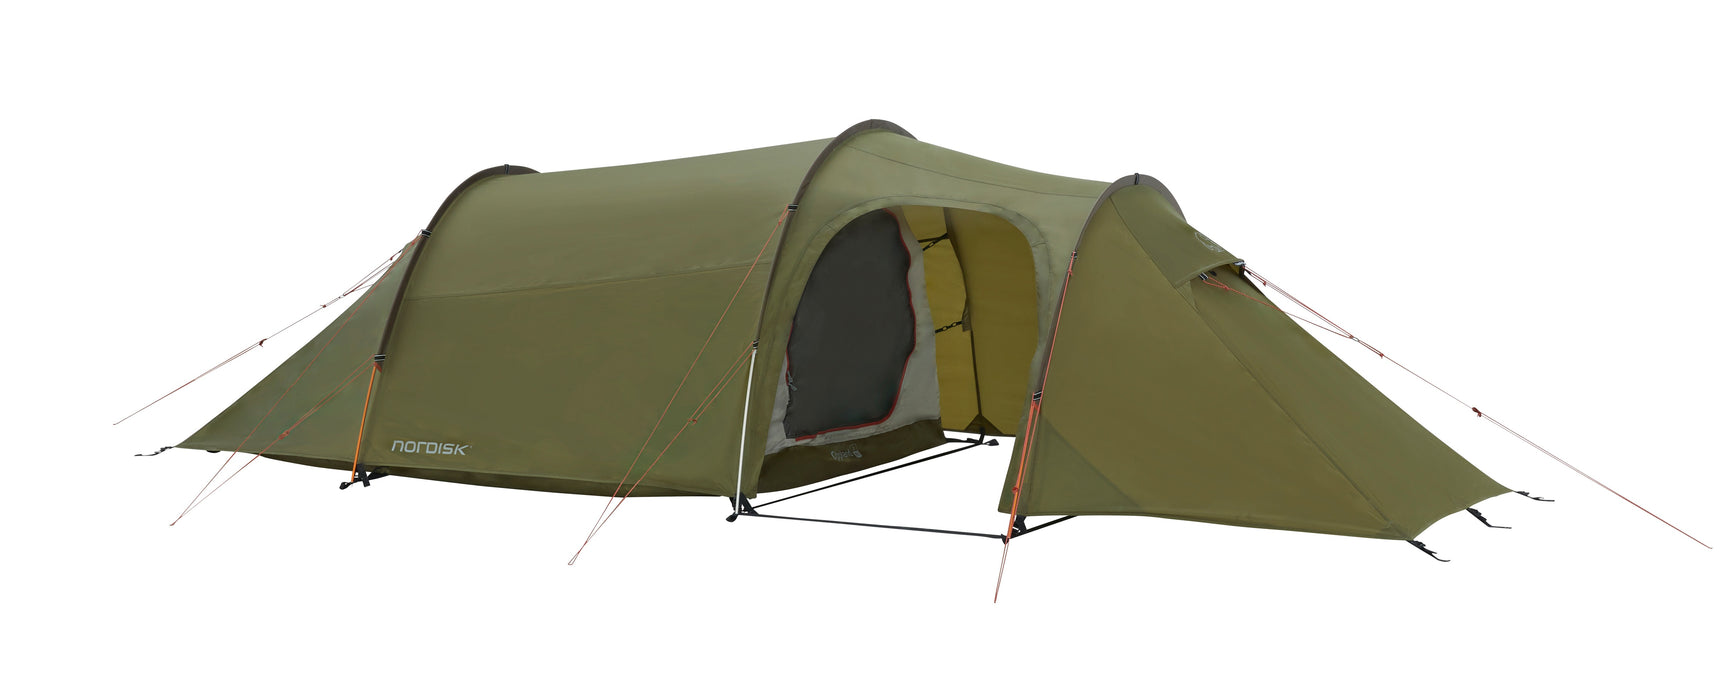 Nordisk Oppland 2 PU Tent (2.0)